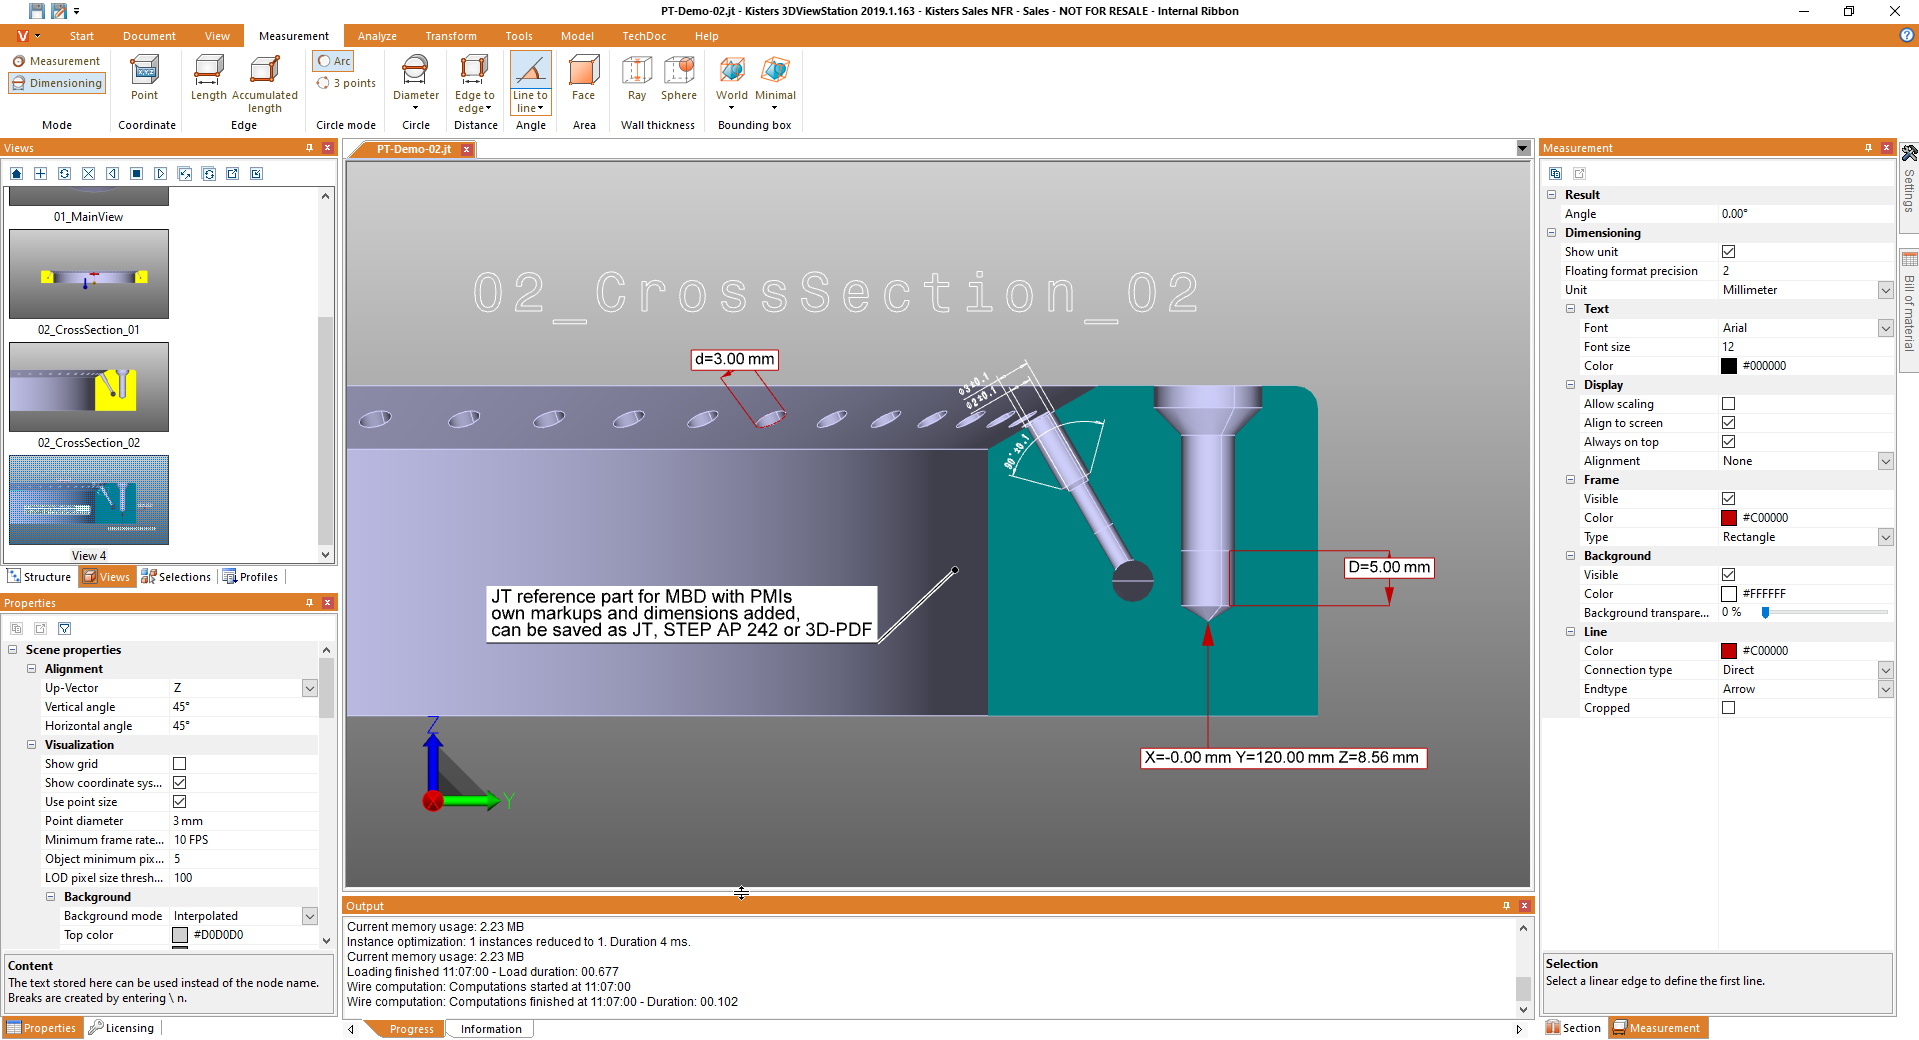 3DViewStation supports PMIs, MBD processes